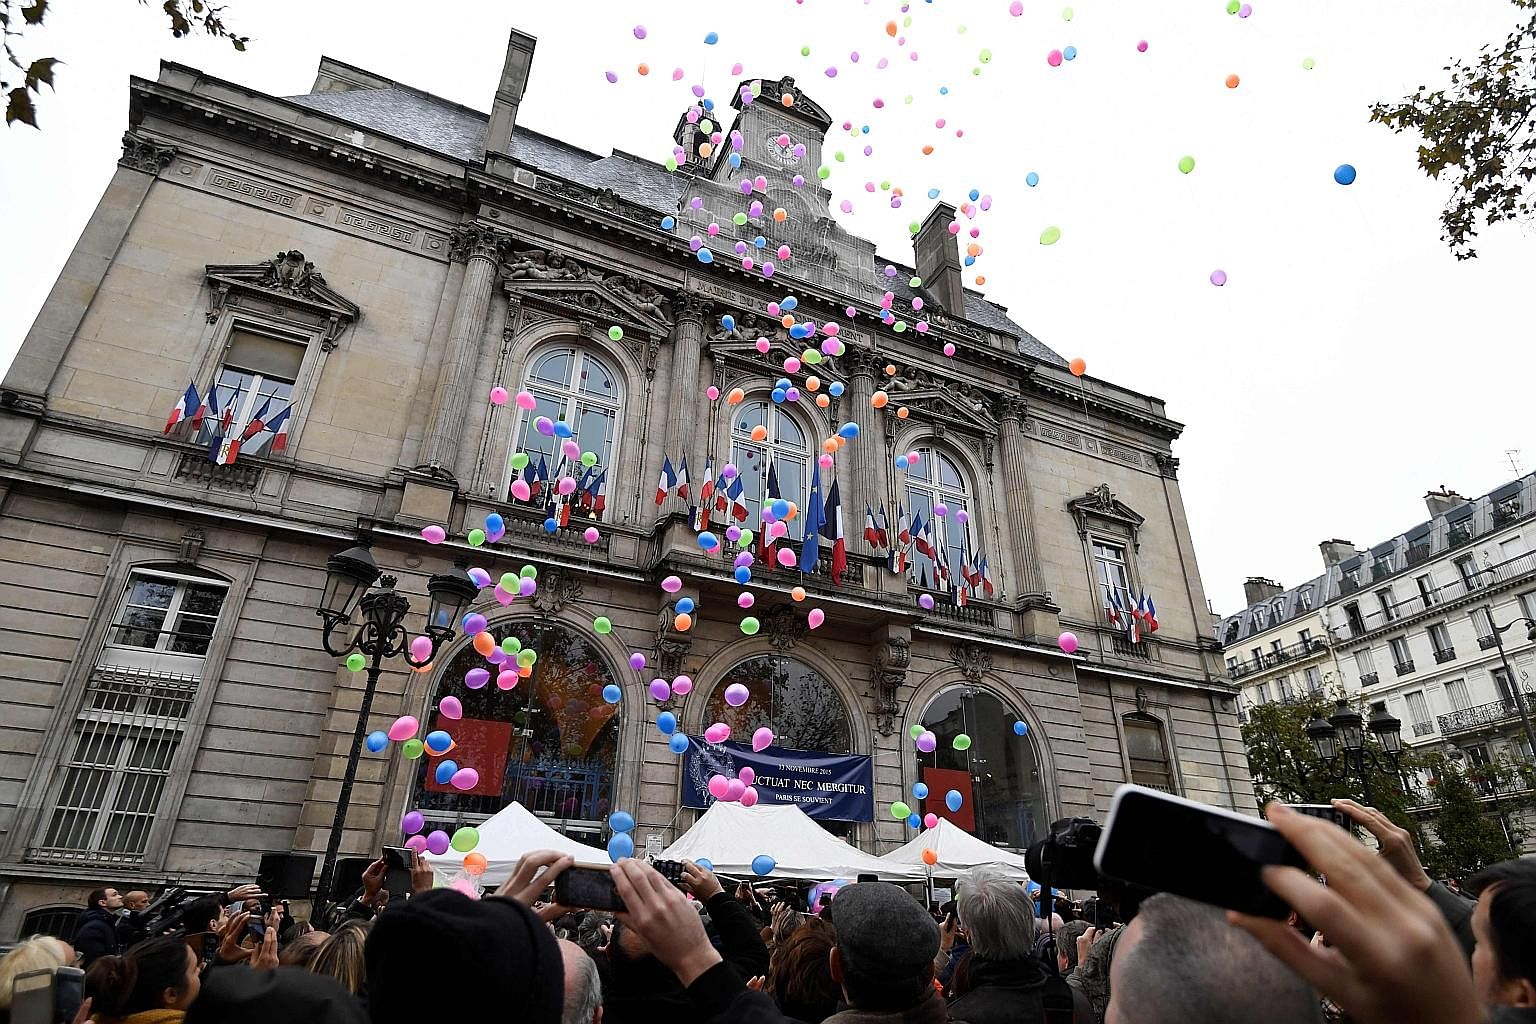 To mark the first anniversary of the Nov 13 terrorist attacks in Paris, people released balloons (above) in front of the city hall of Paris' 11th arrondissement yesterday while Sting (below) played a day earlier at the reopening of the Bataclan conce